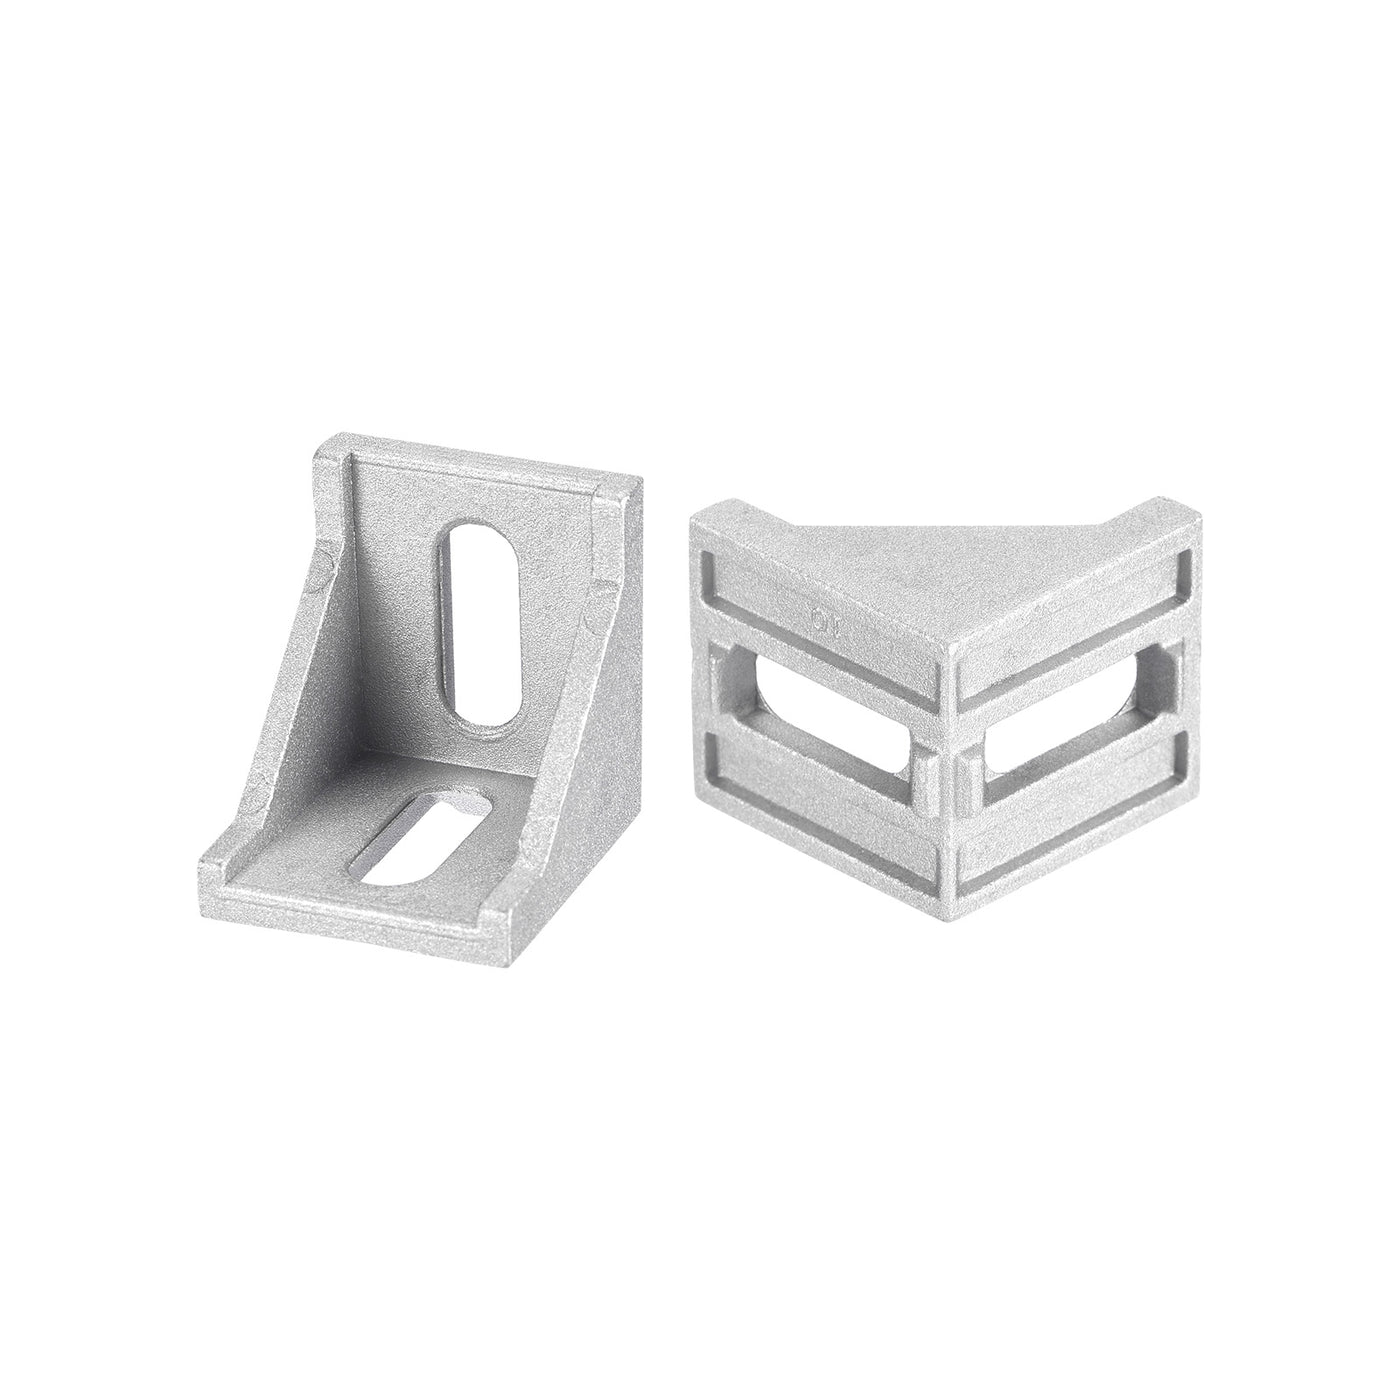 uxcell Uxcell 12Pcs Inside Corner Bracket Gusset, 38x38x35mm 4040 Angle Connectors for 4040/4080 Series Aluminum Extrusion Profile Silver